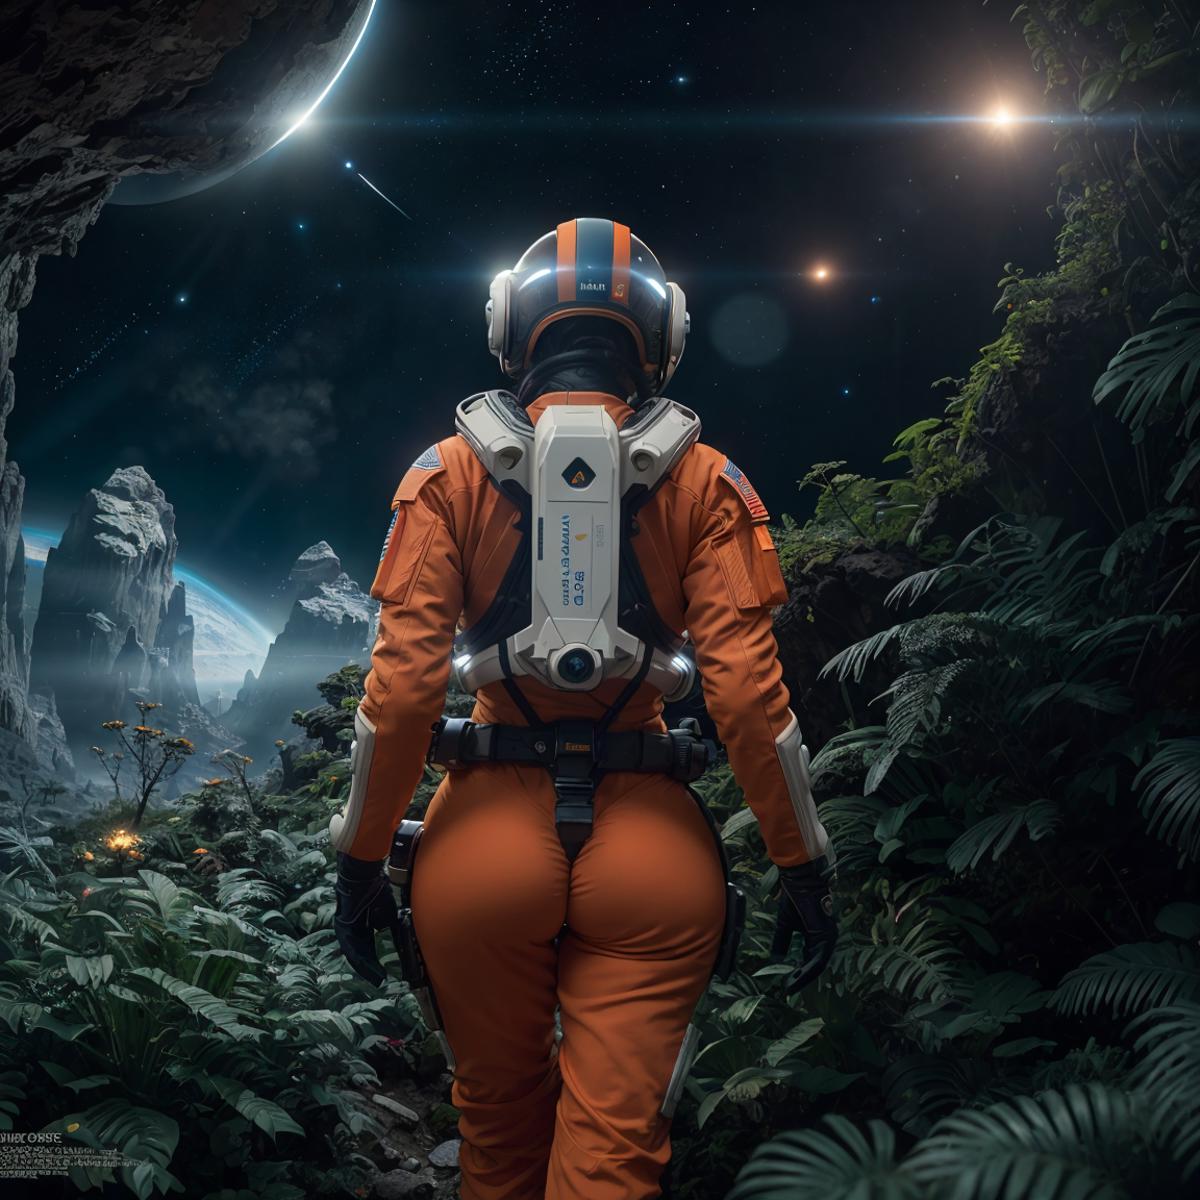 Astronaut in Orange Jumpsuit with Backpack Walking Through Jungle